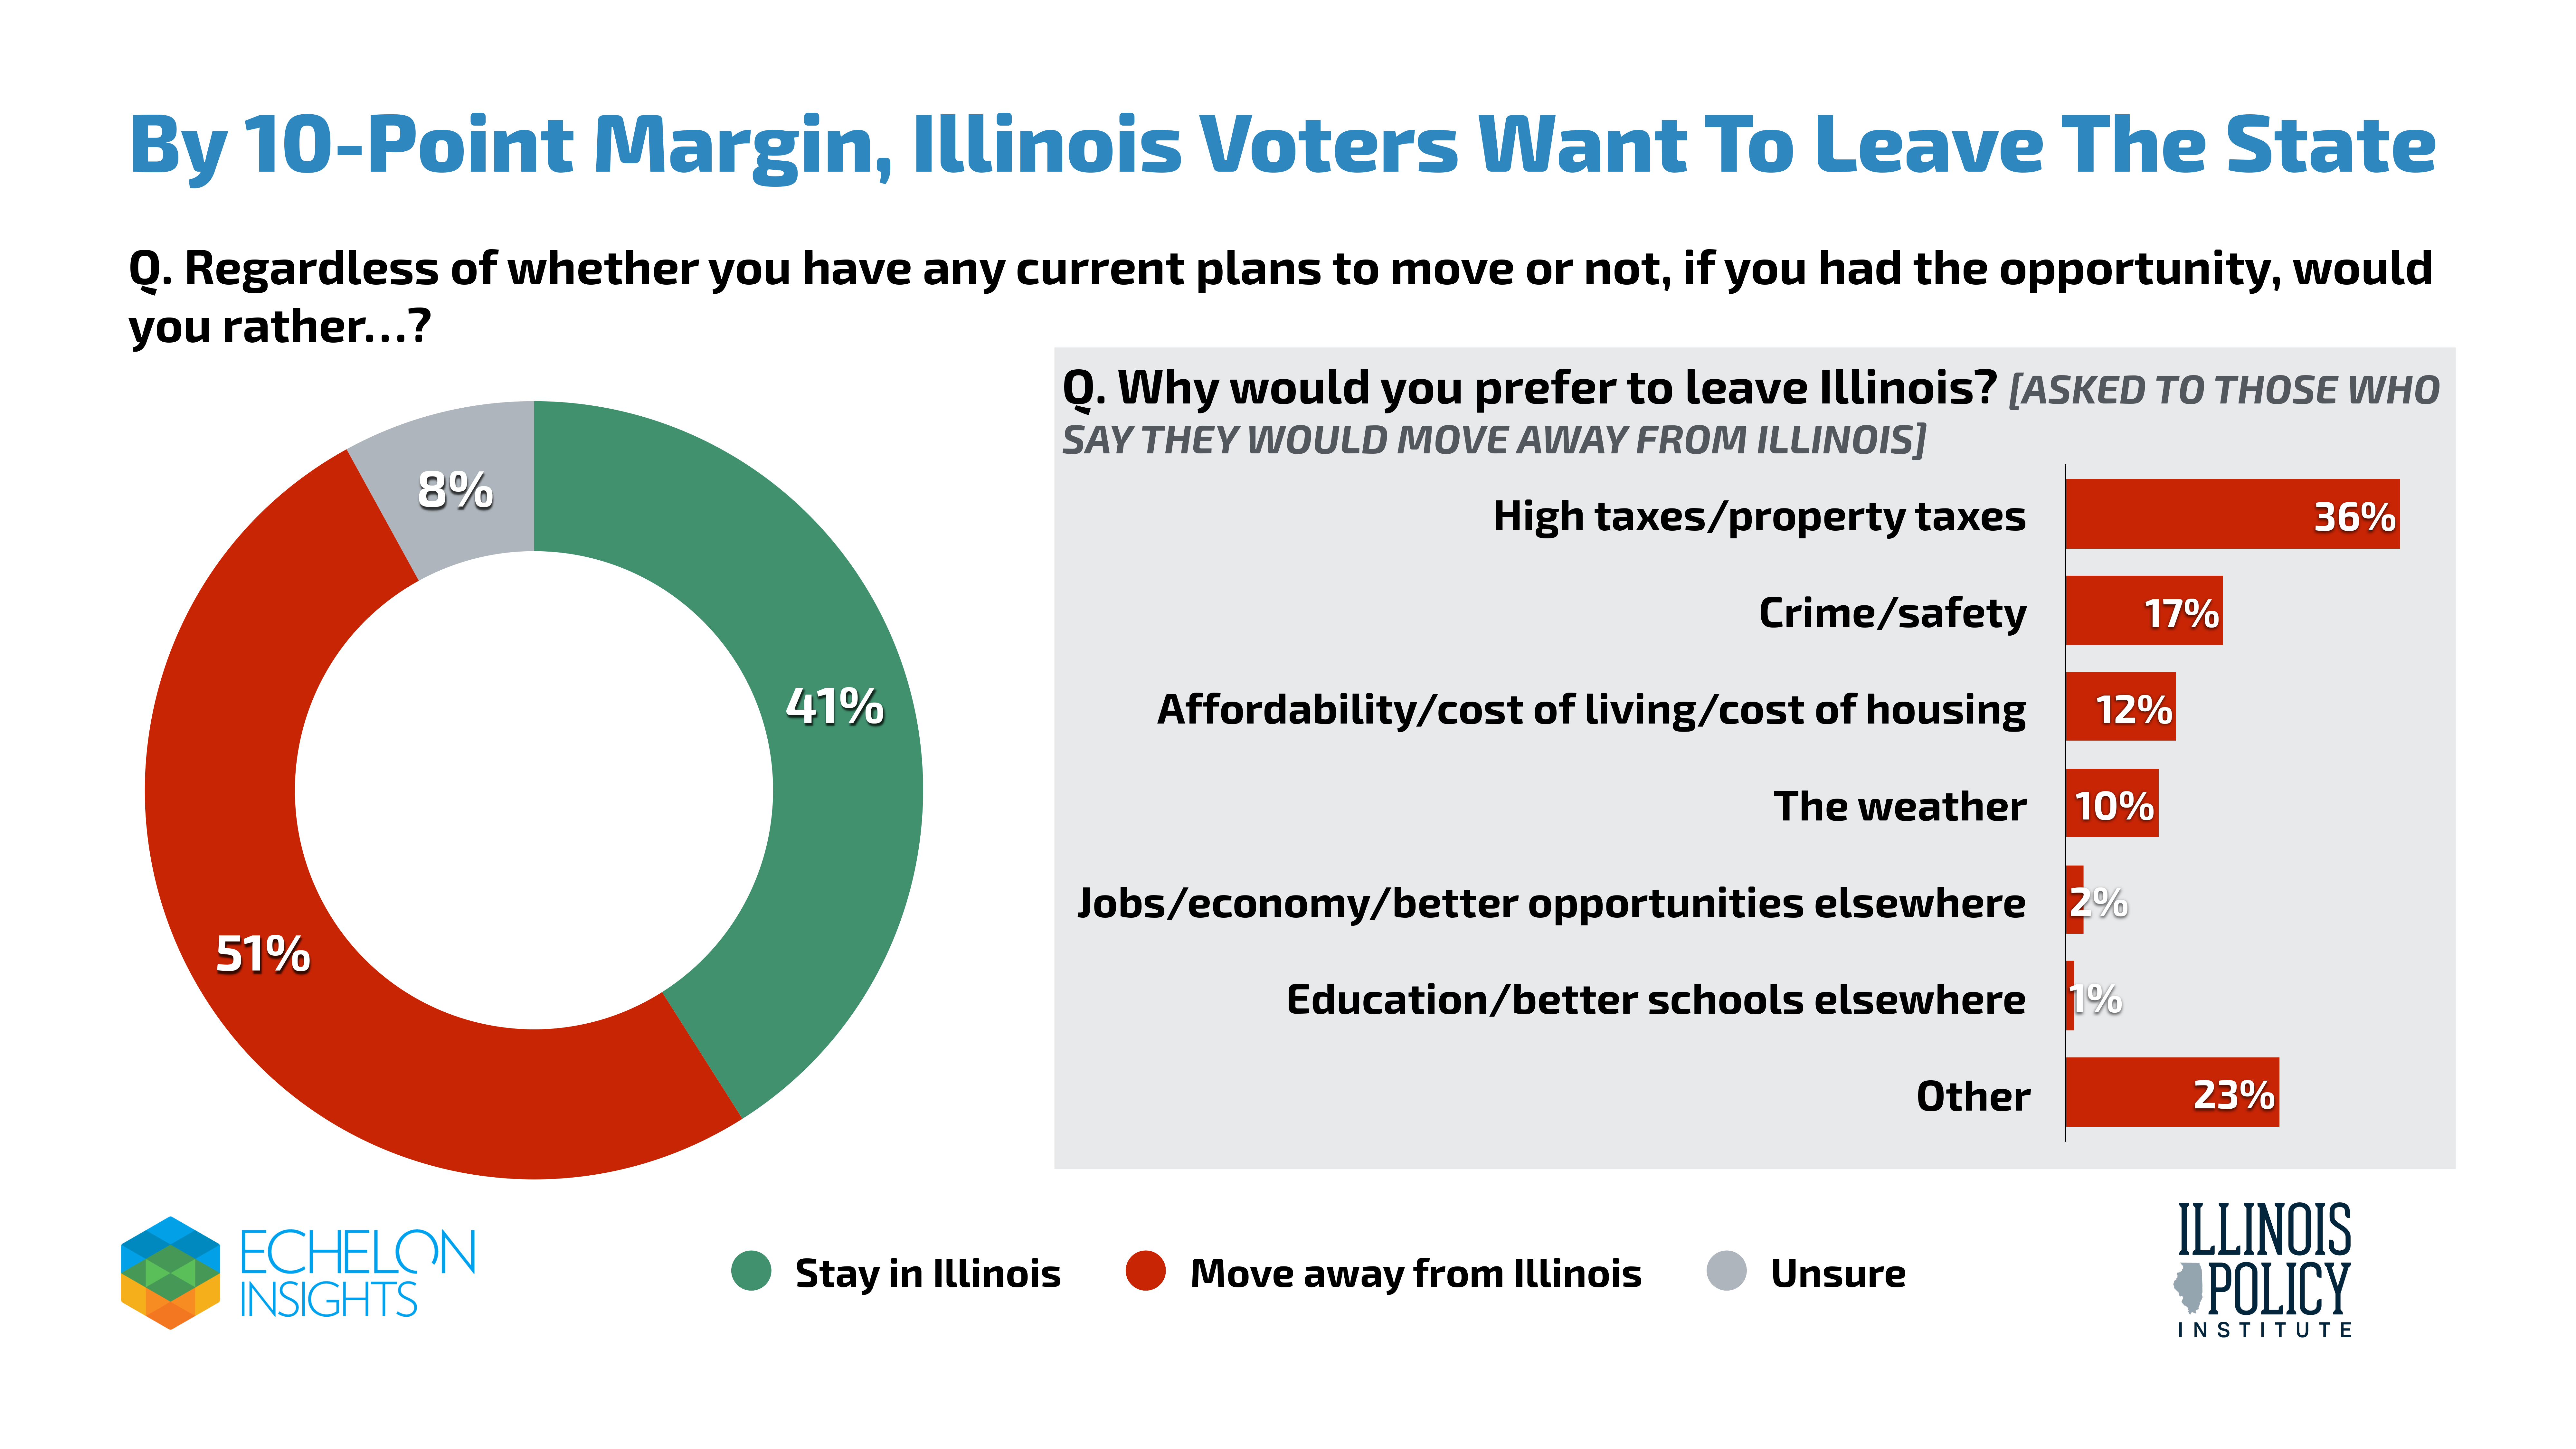 By 10-point margin, Illinois voters want to leave the state